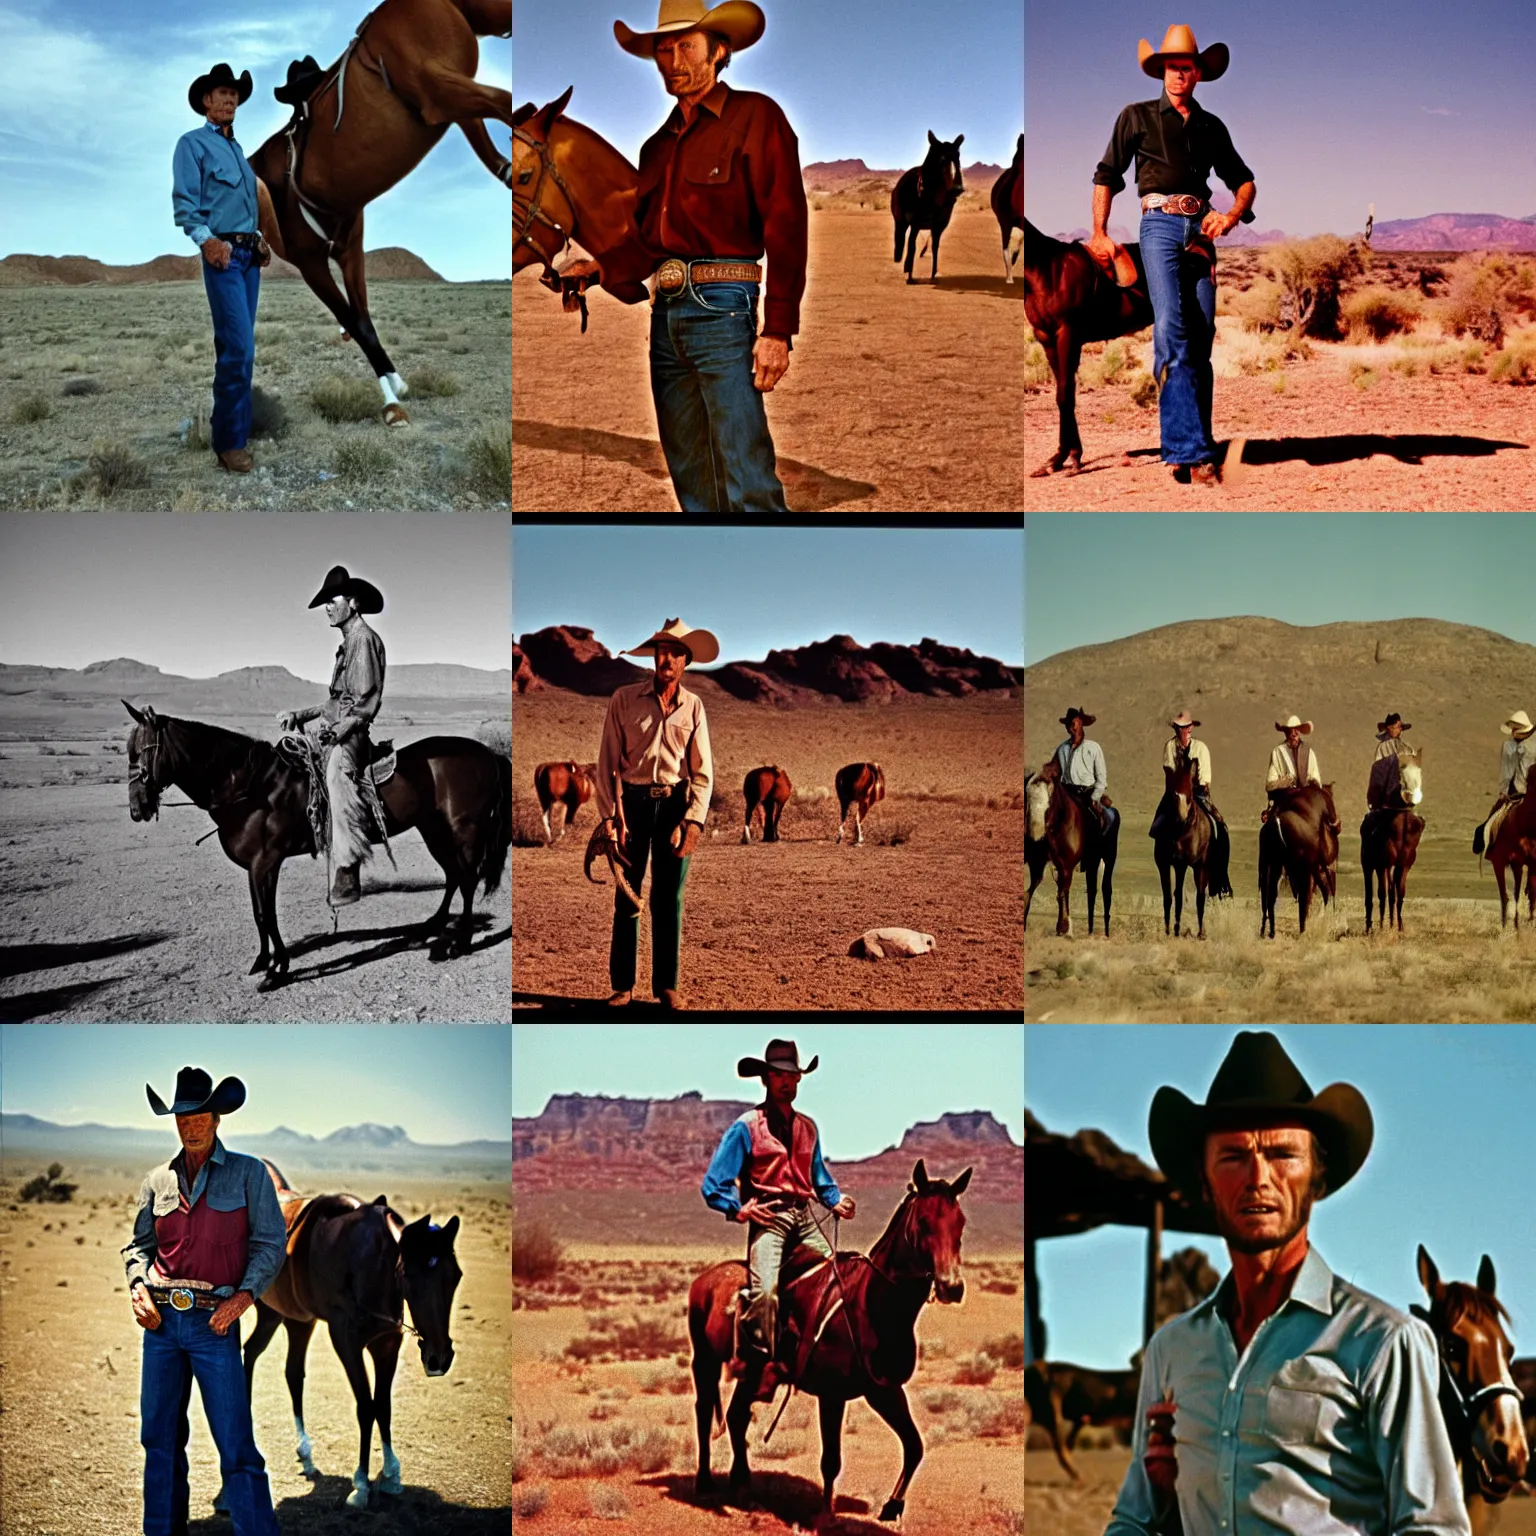 Prompt: wide angle shot in color from 1 9 6 9 of clint eastwood as a cowboy, standing with hands on colts. desert in the background. cinematic, 5 0 mm lens